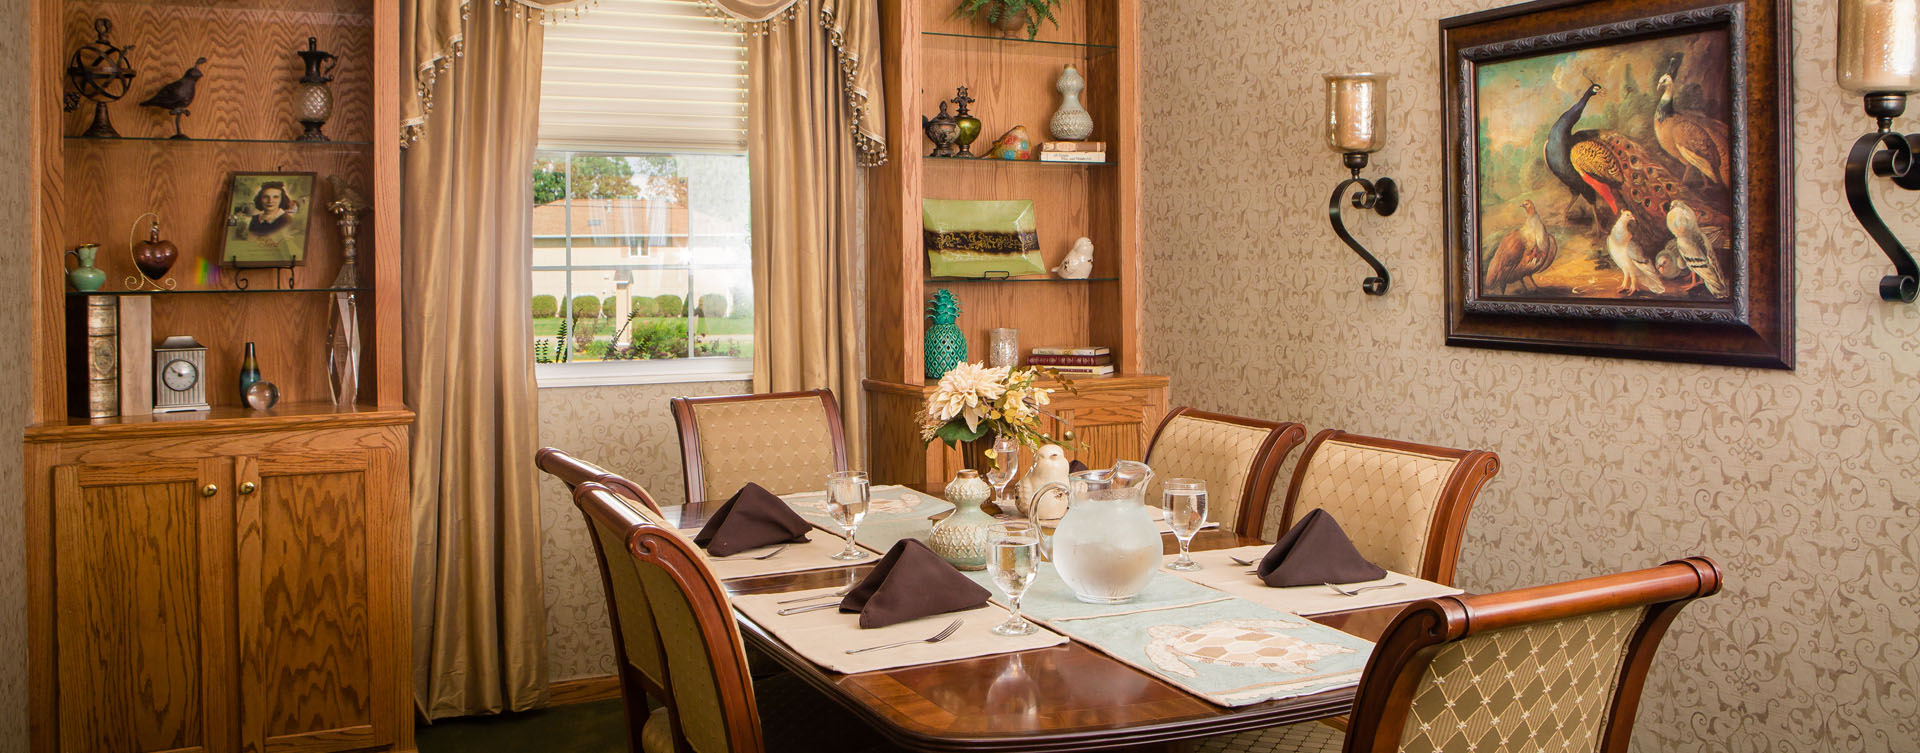 Food is best when shared with family and friends in the private dining room at Bickford of Macomb